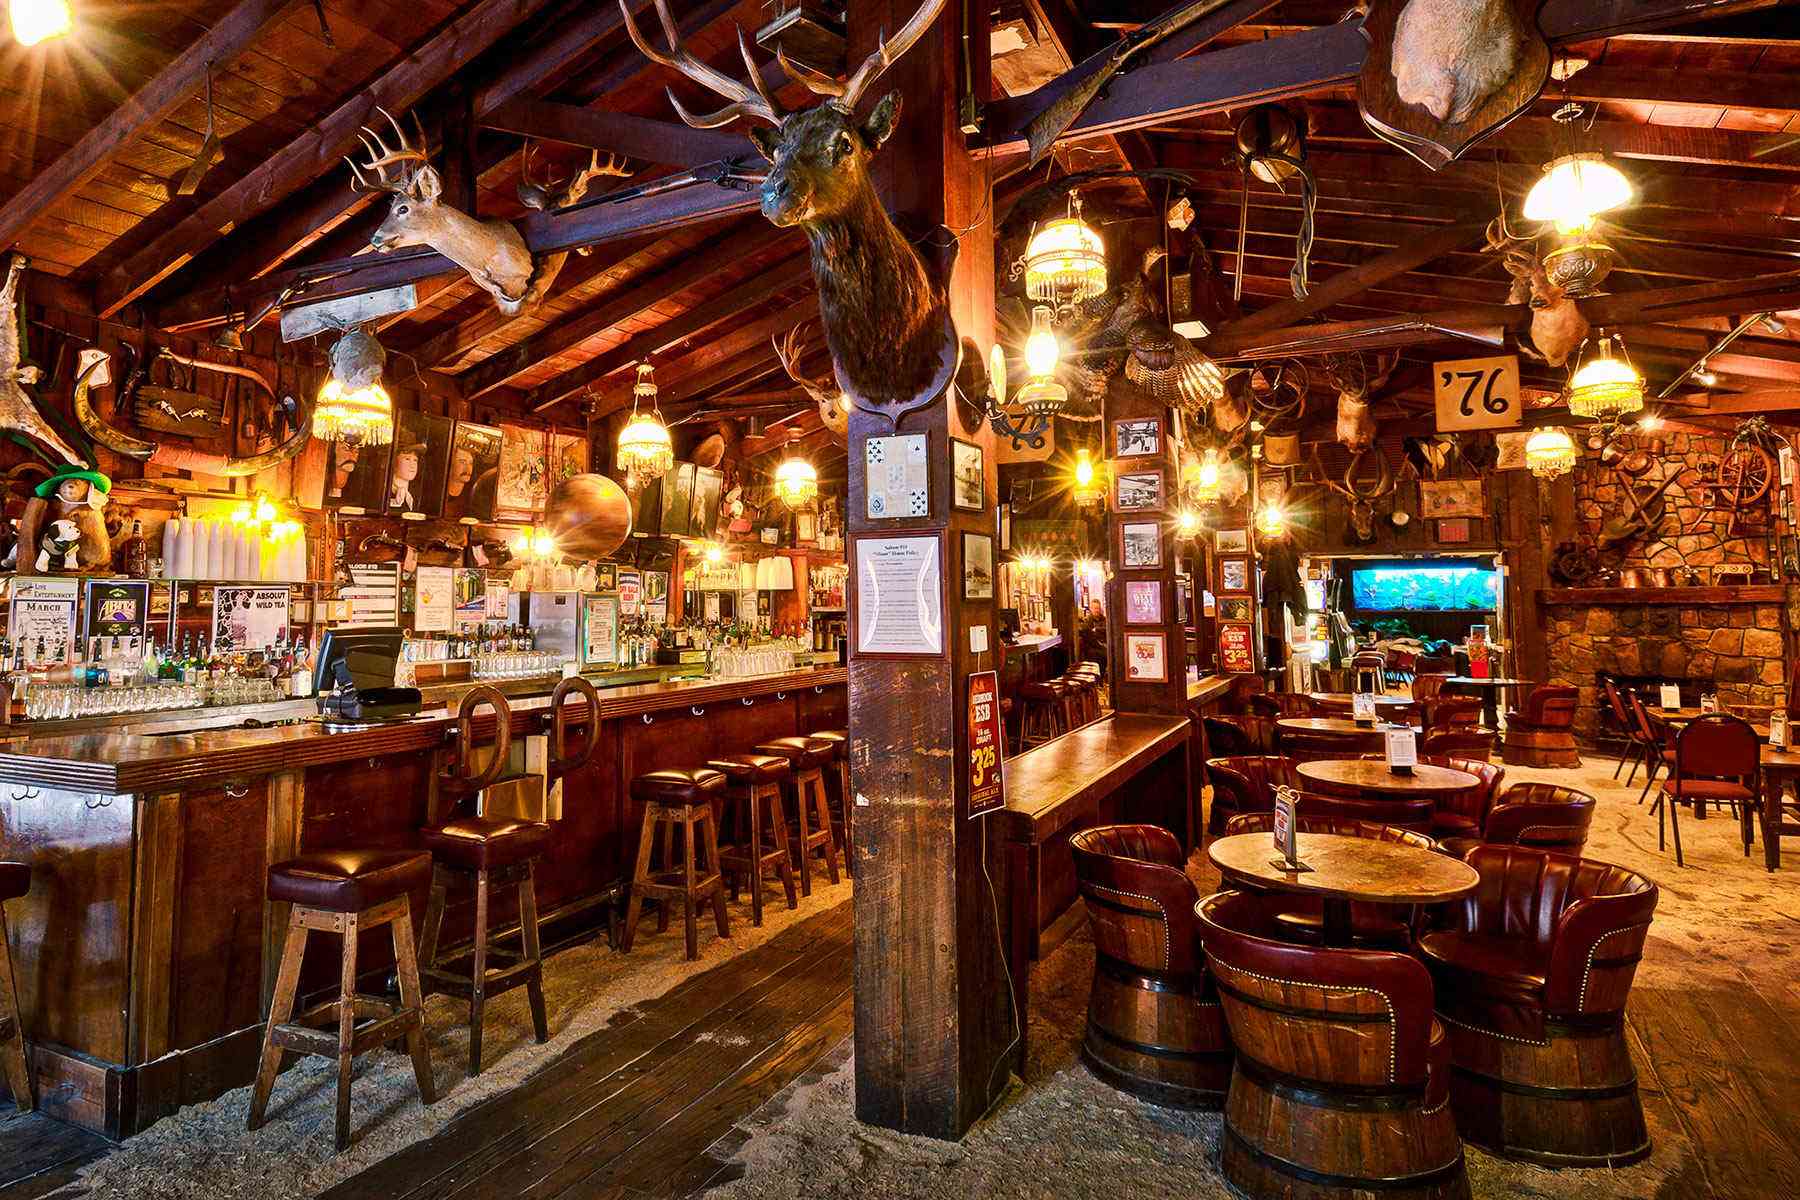 12 Wild West Bars to Make You Feel Like a Cowboy – Fodors Travel Guide